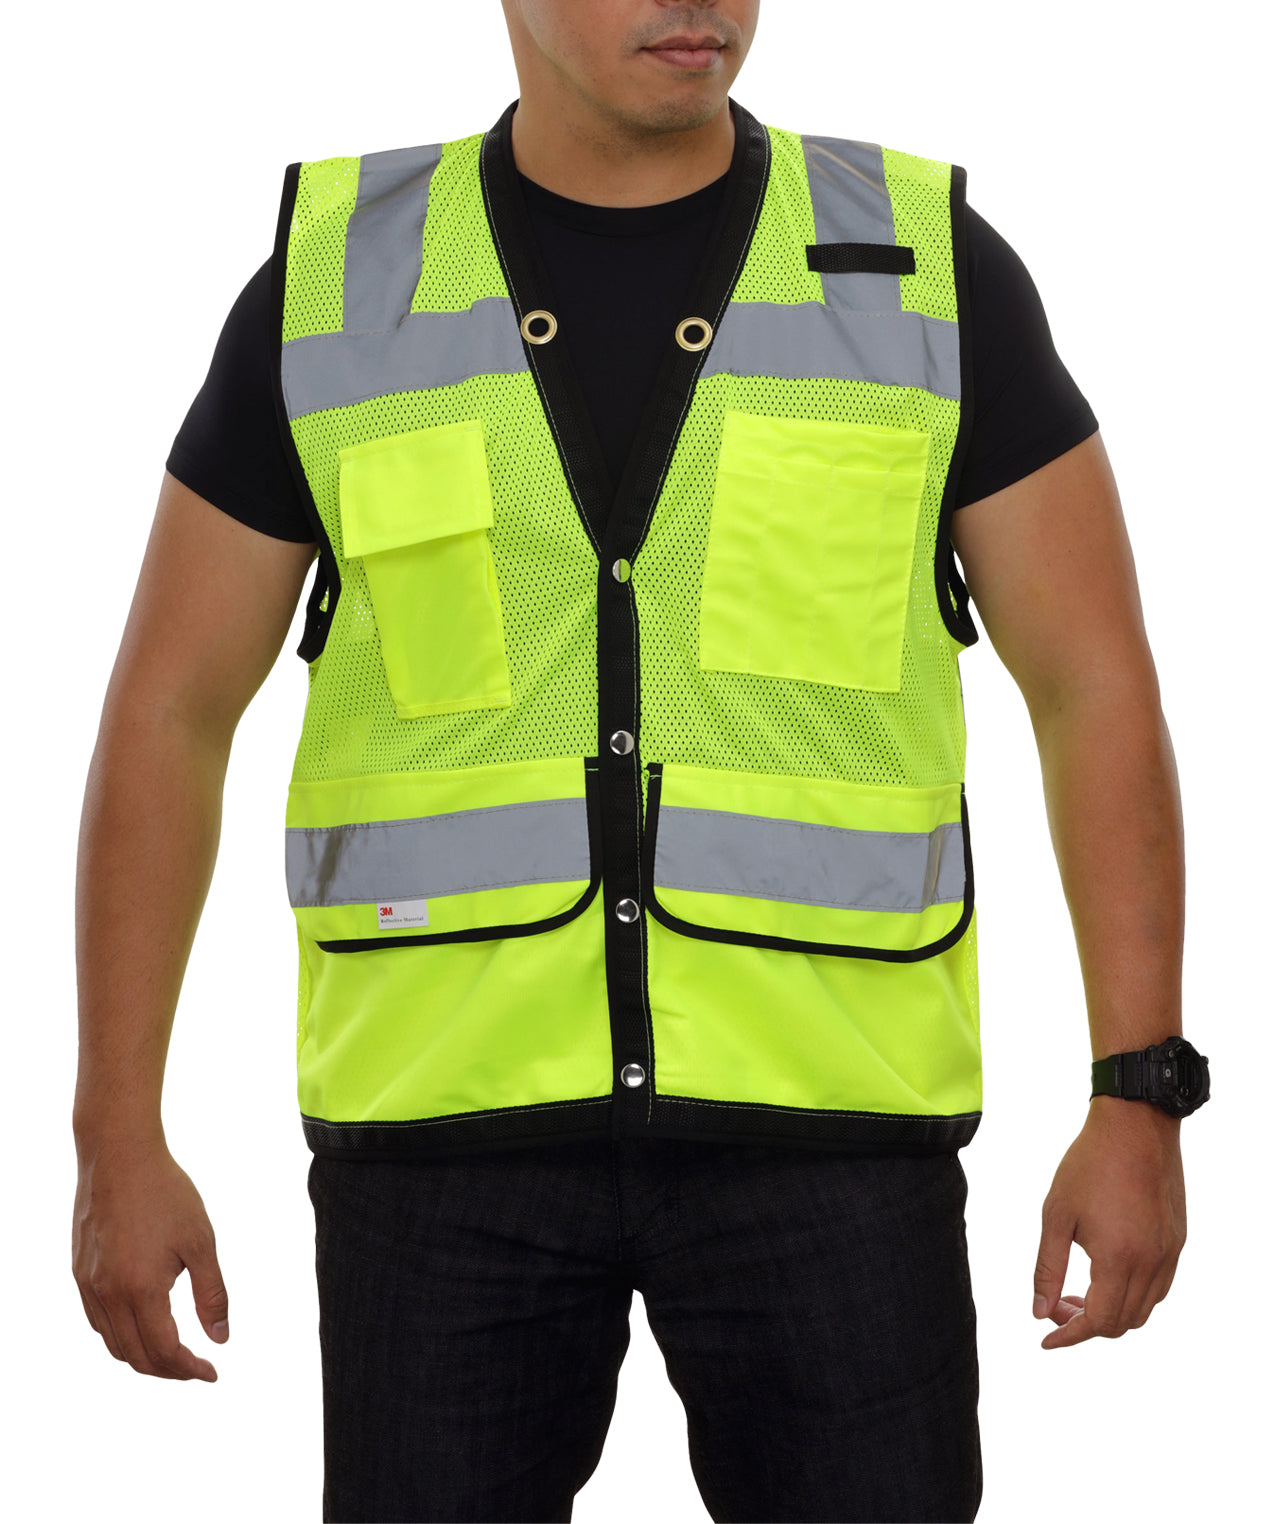 Safety Vest Mesh Cloth Reflective Jacket High Visibility for